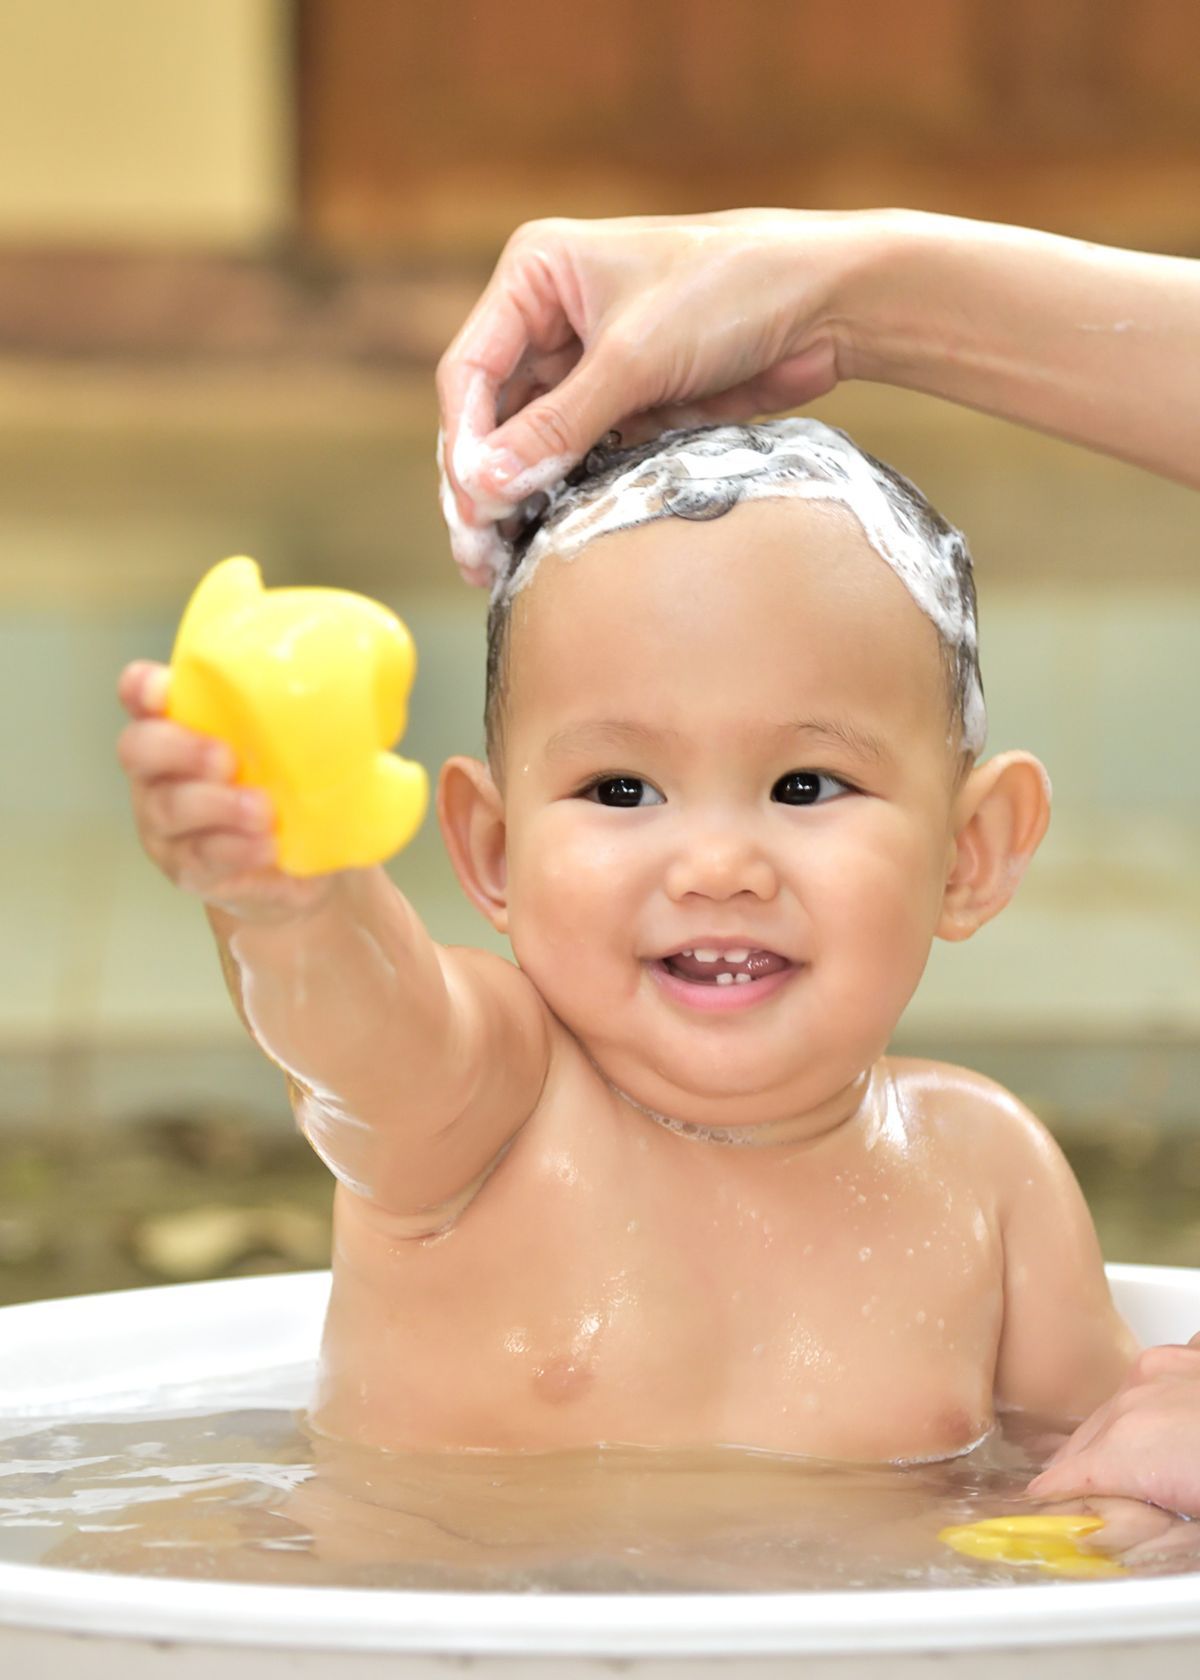 The ABCs of Choosing the Best Shampoo for Your Little One